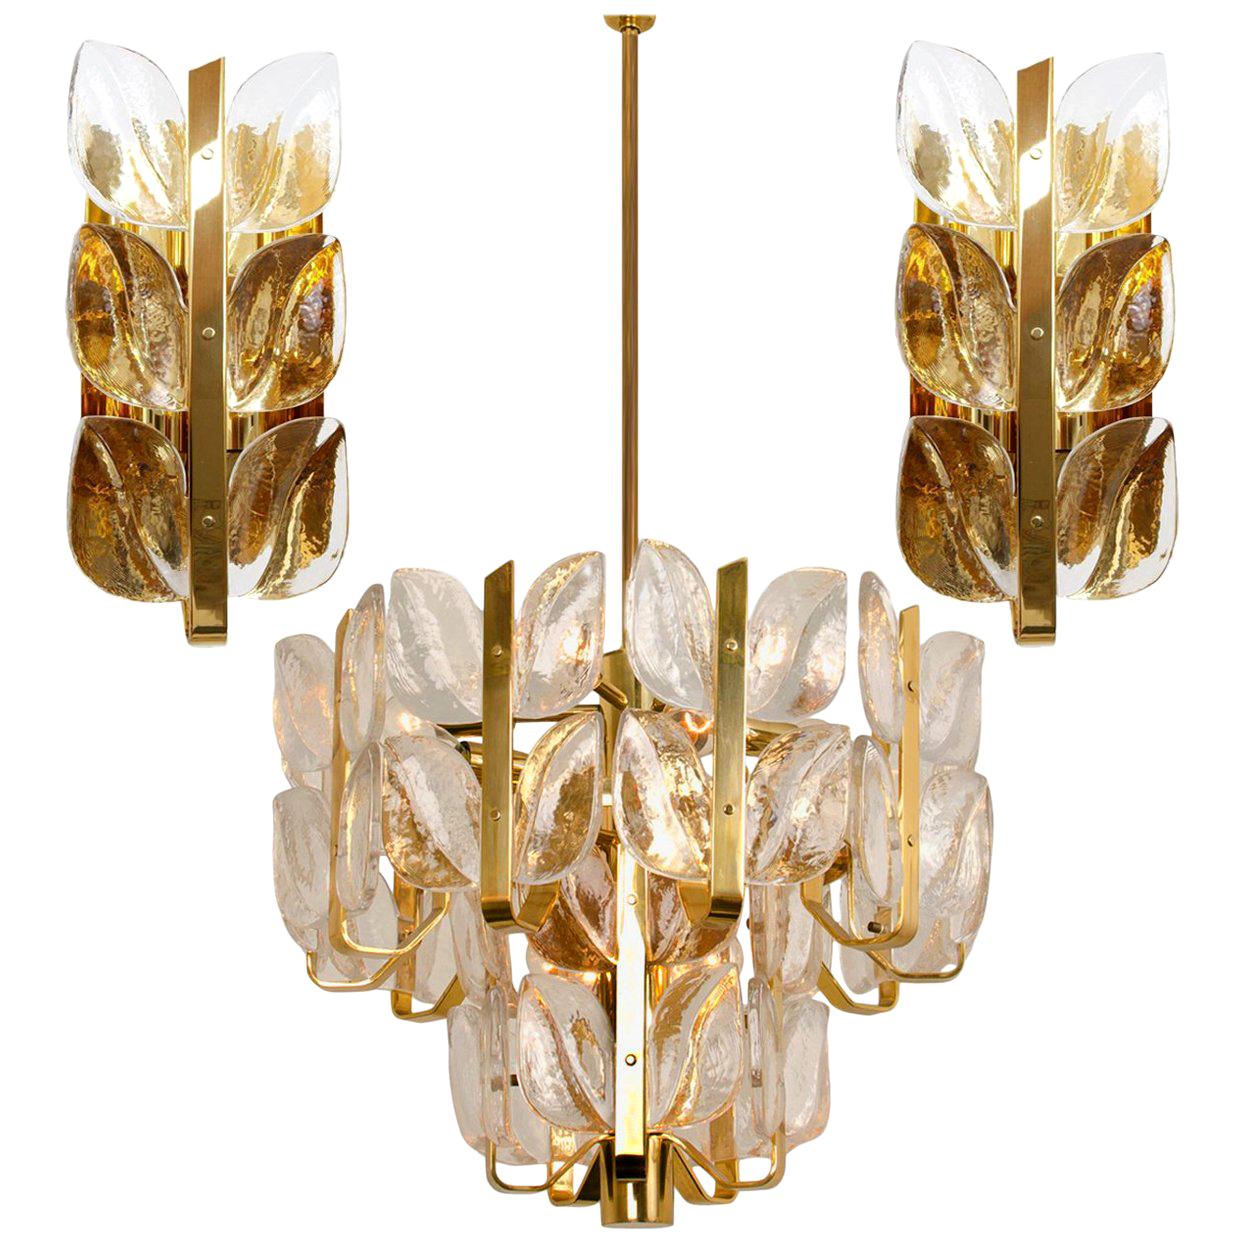 We offer an amazing set of Kalmar light fixtures. The set is executed to a very high standard. Model Florida, by J.T. Kalmar, manufactured in midcentury, circa 1970.

The fixtures are made of plated gold and large fire-polished brilliant crystal